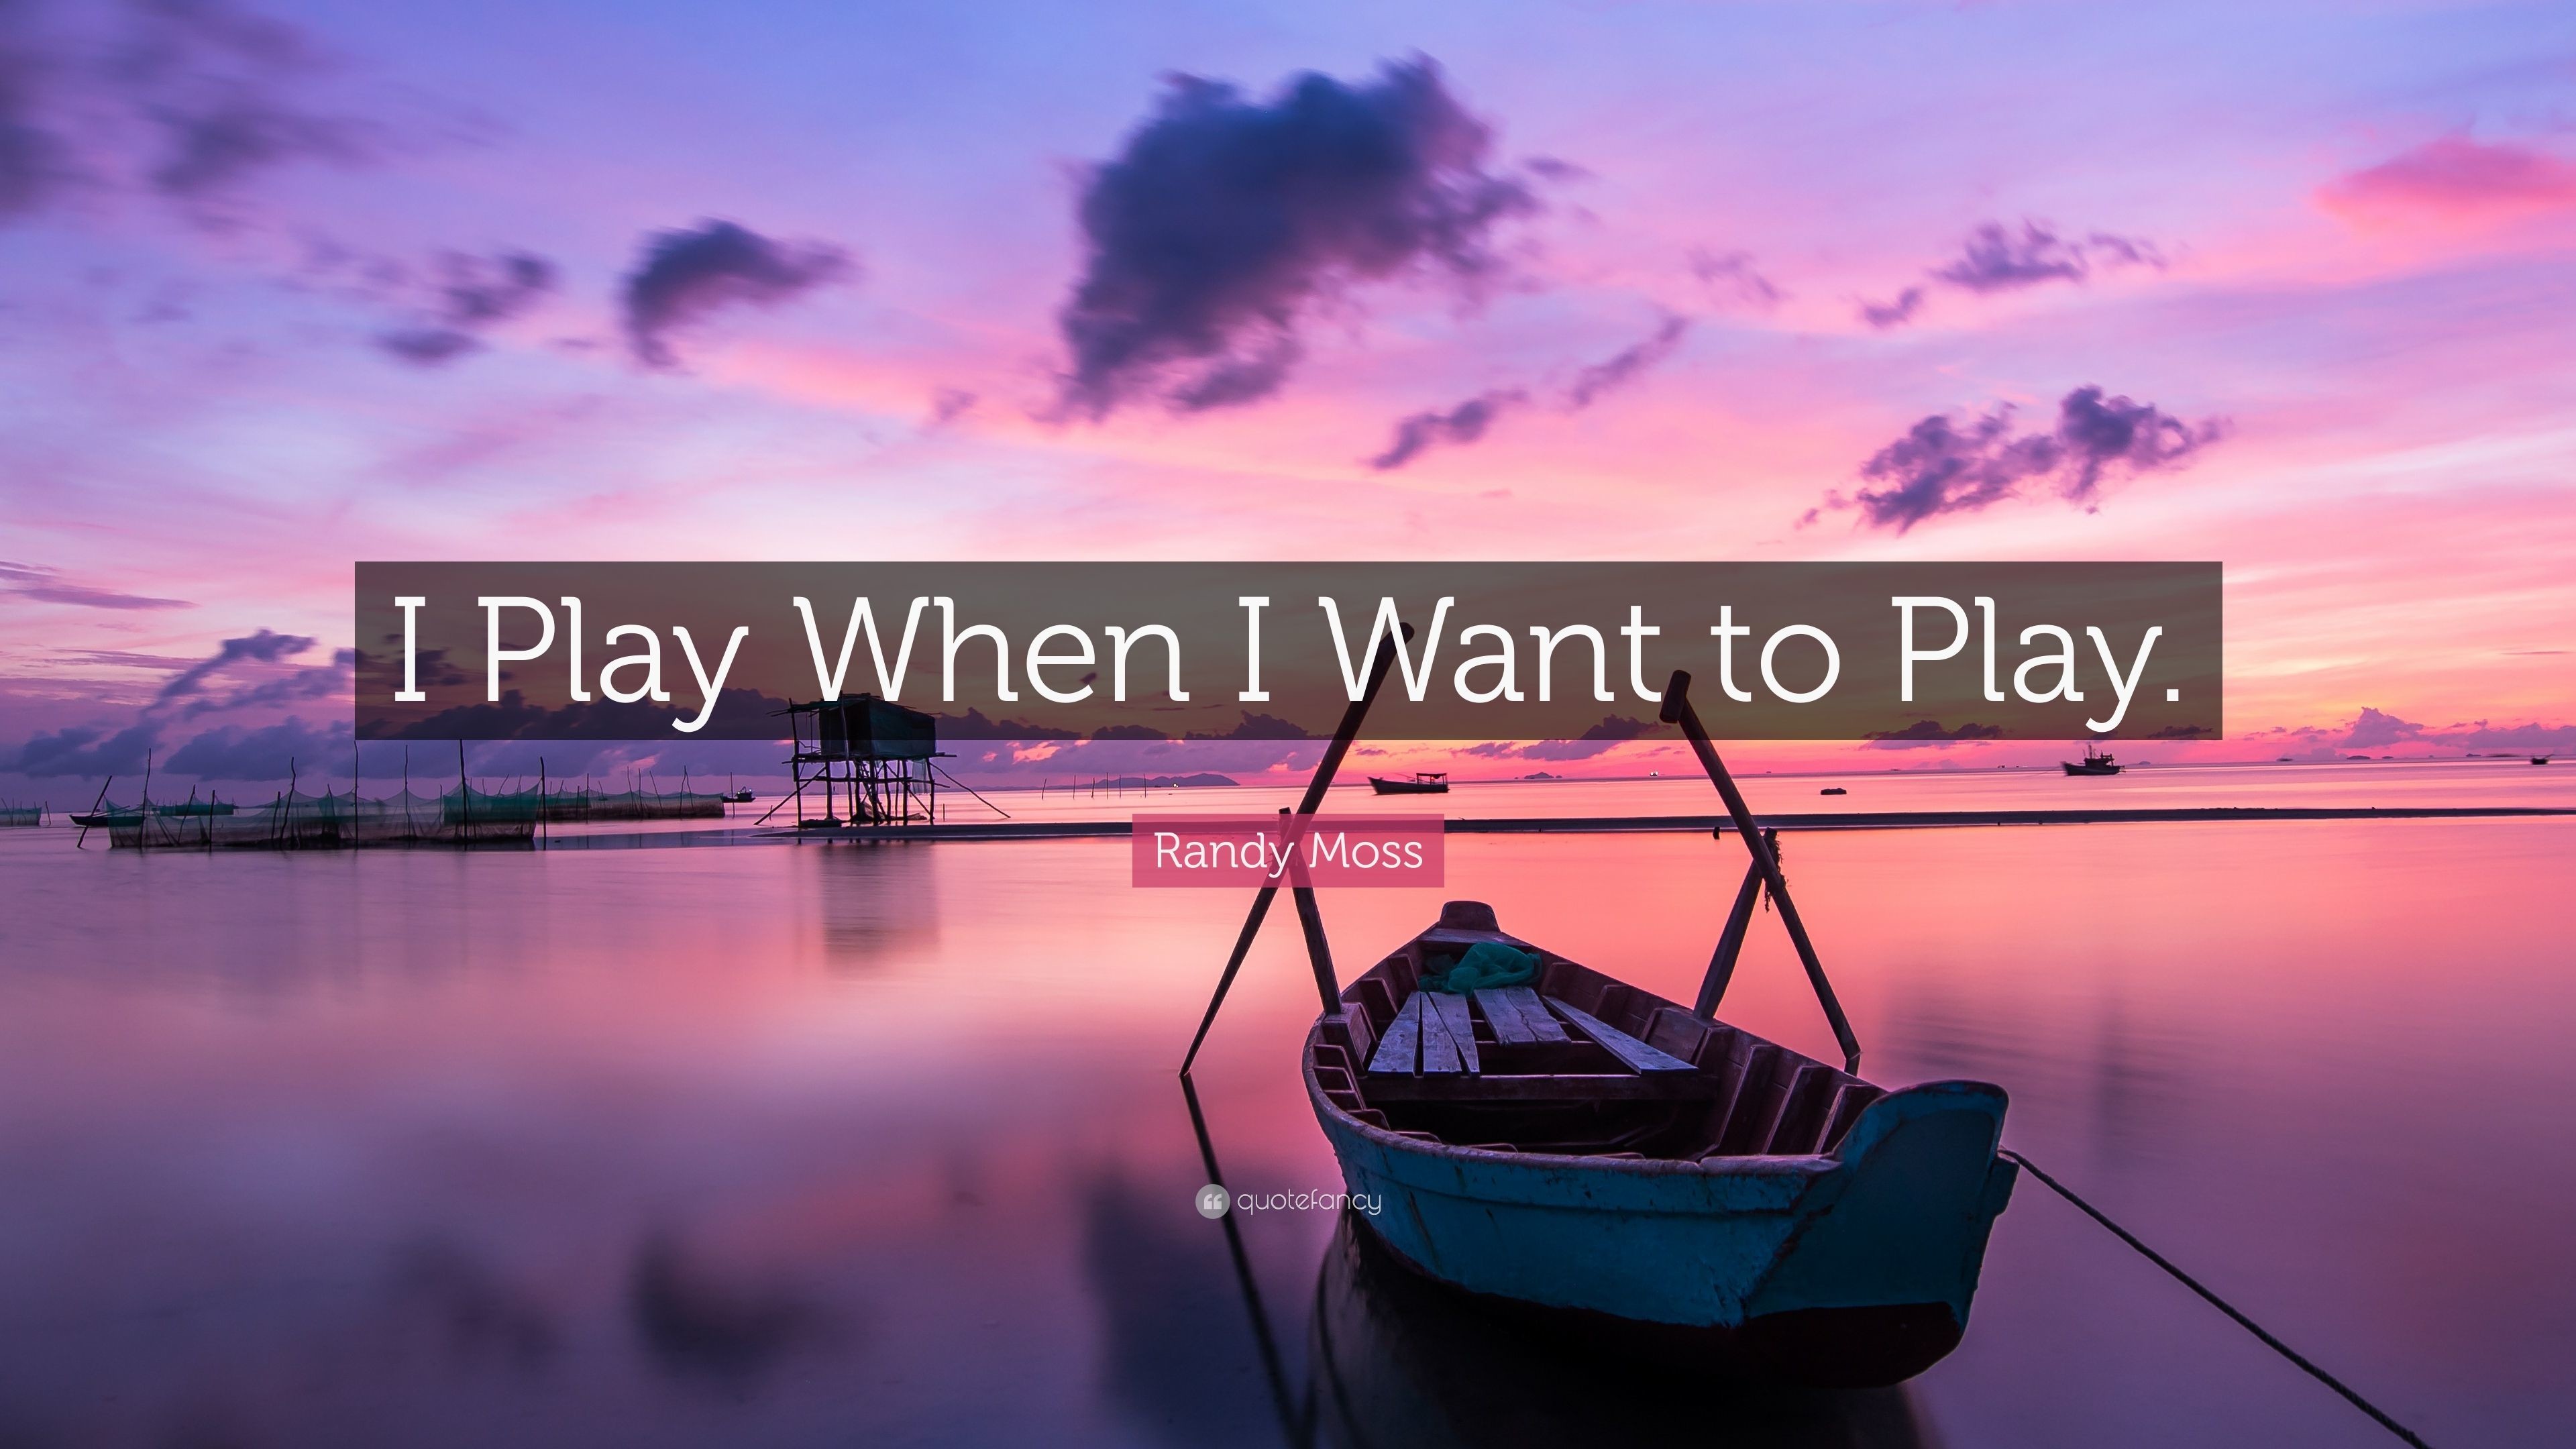 3840x2160 Randy Moss Quote: “I Play When I Want to Play.”